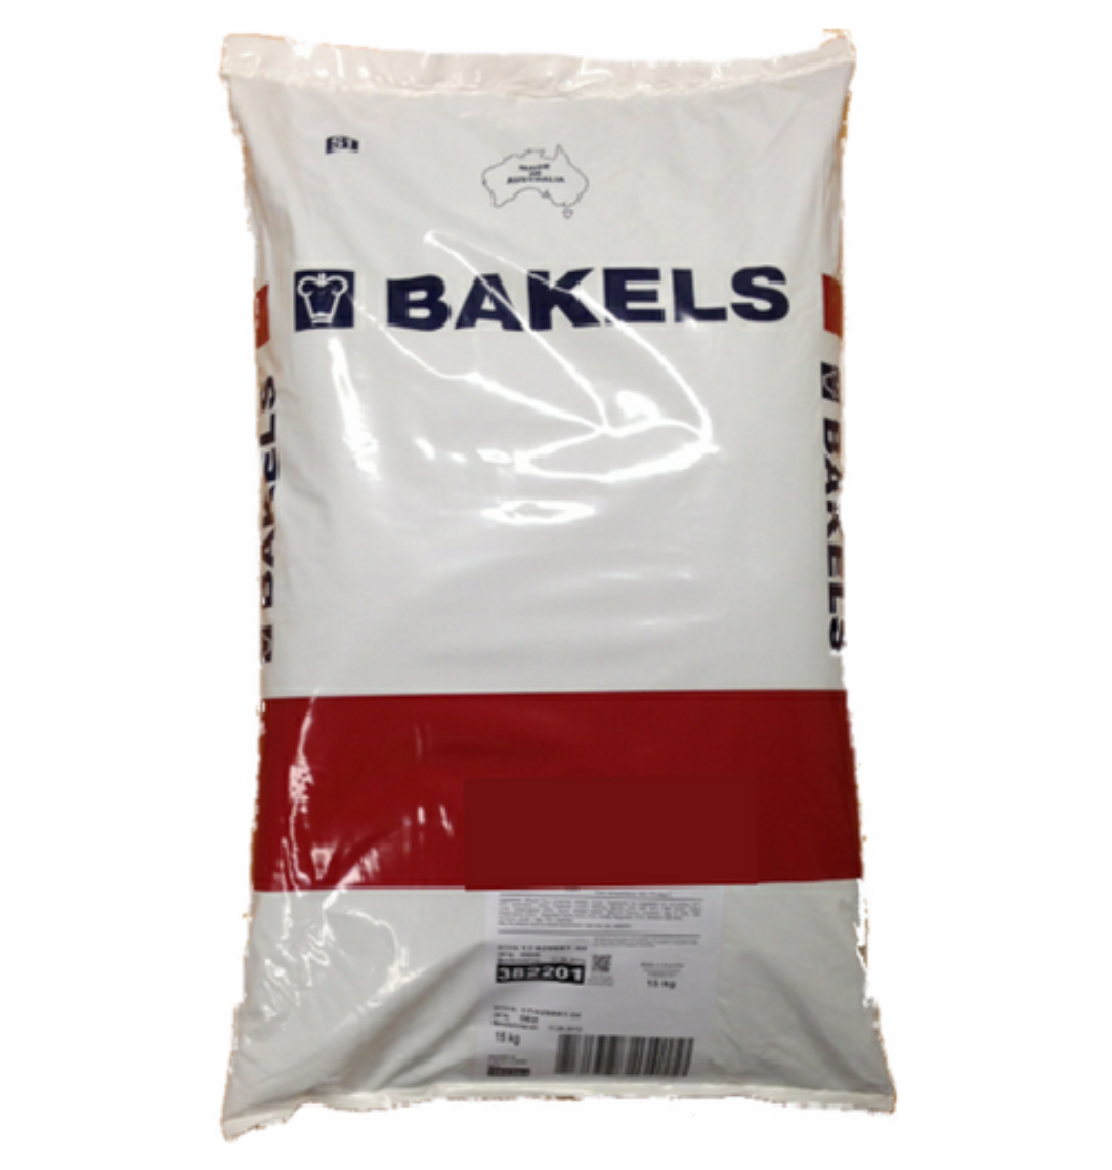 Picture of 15KG BAKELS BREAD & ROLL CONCENTRATE ADVANCE (394651) (s/ord)